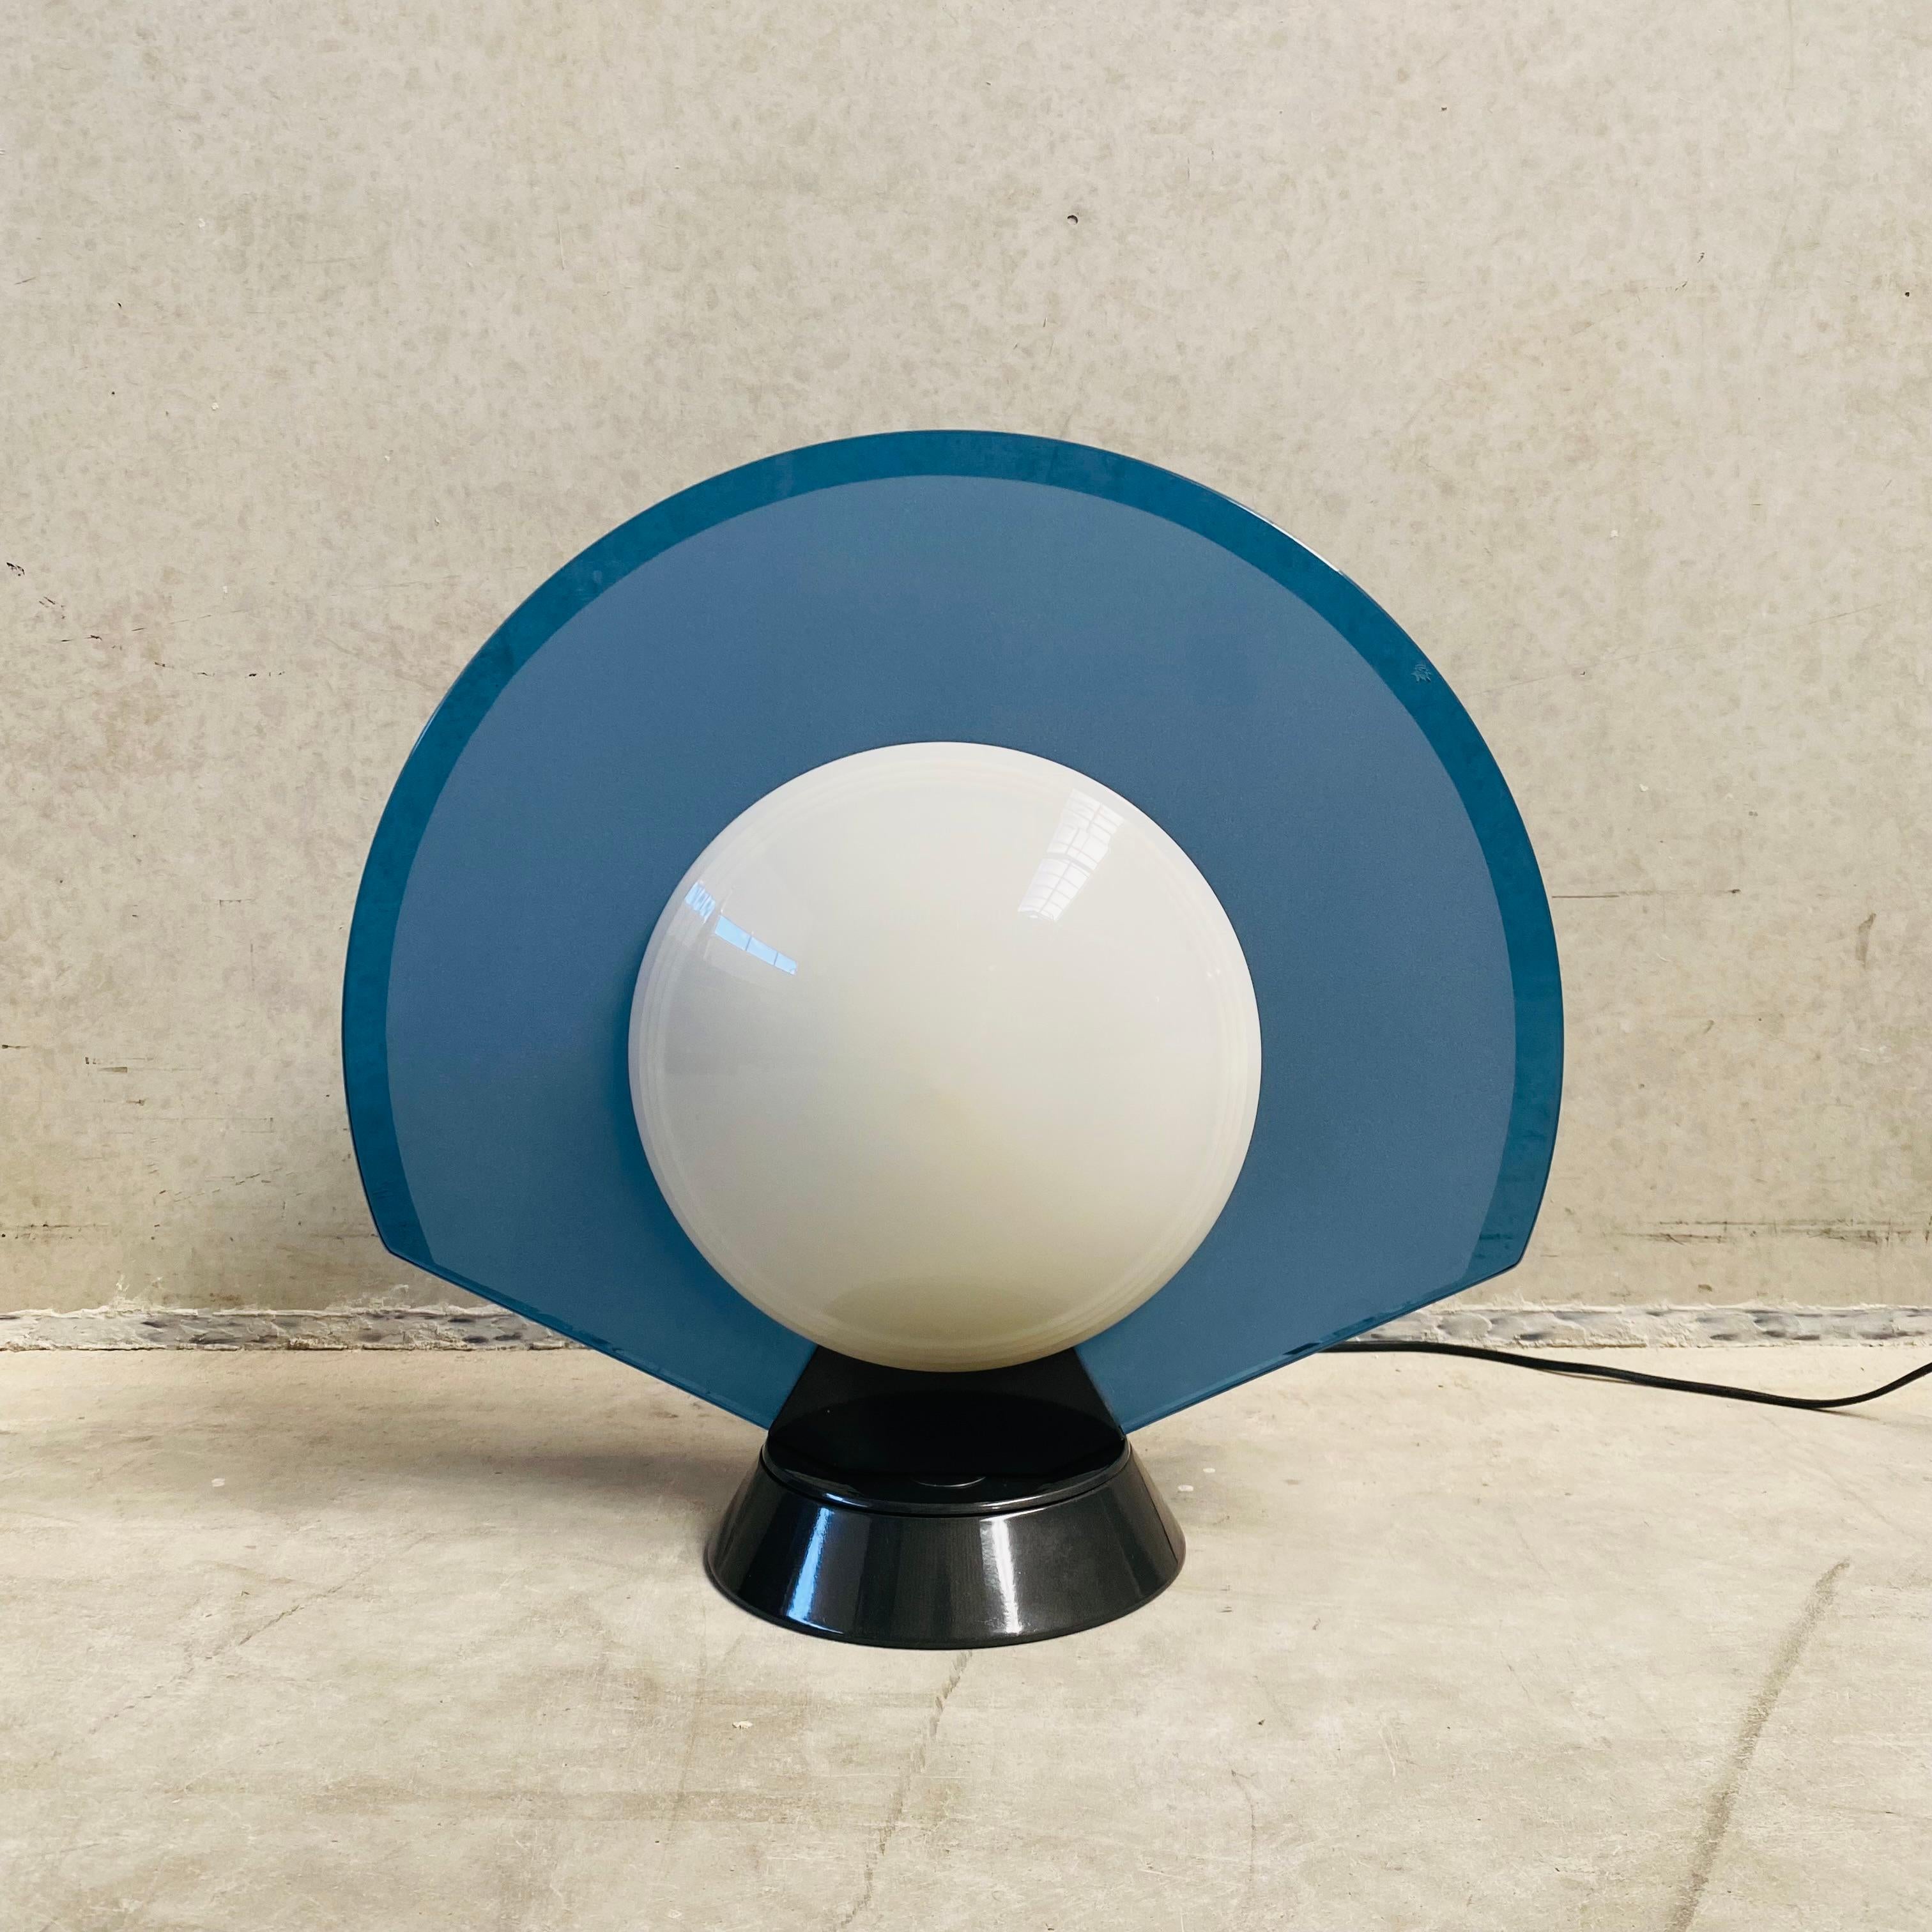 TABLE LAMP 'TIKAL' BY PIER GIUSEPPE RAMELLA FOR ARTELUCE, ITALY 1980S

Introducing the timeless elegance of the 